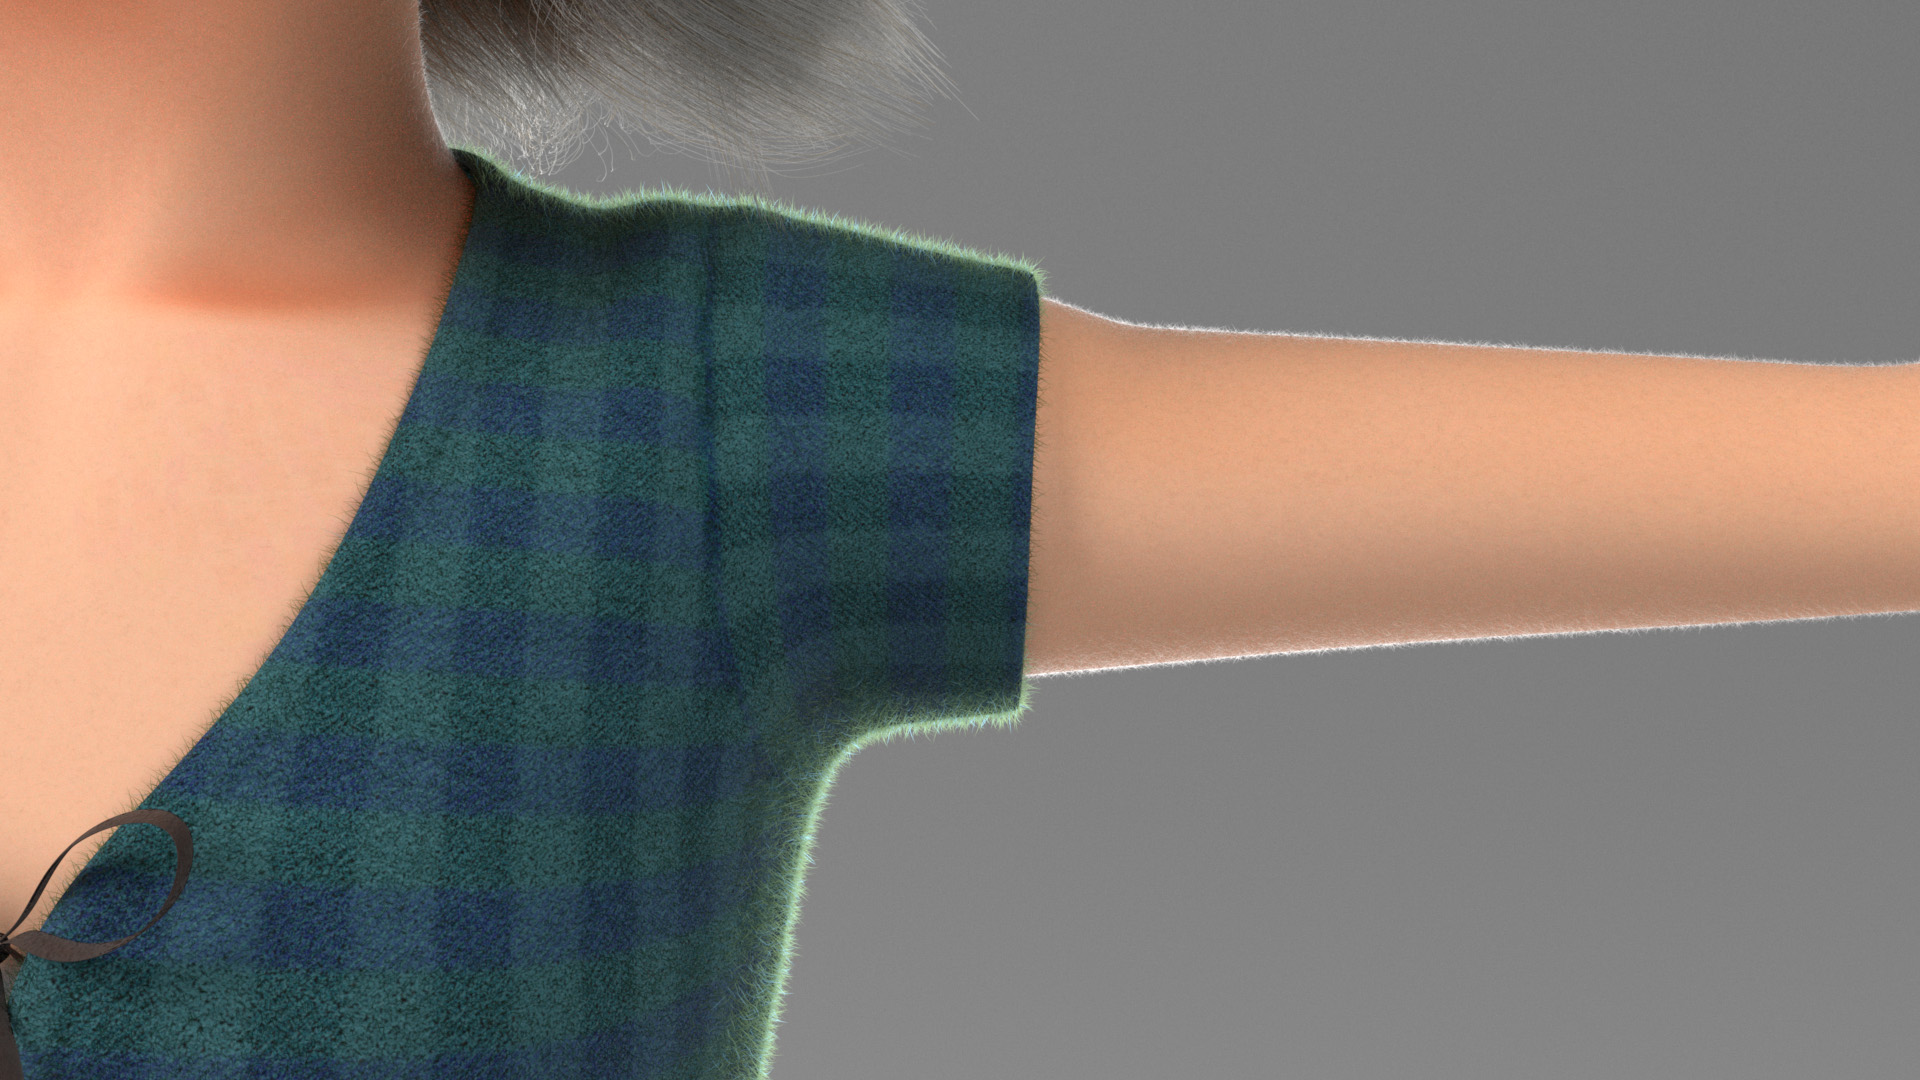 Figure 8: Closeup test render of fuzz on the shirt and peach fuzz on the character's skin.